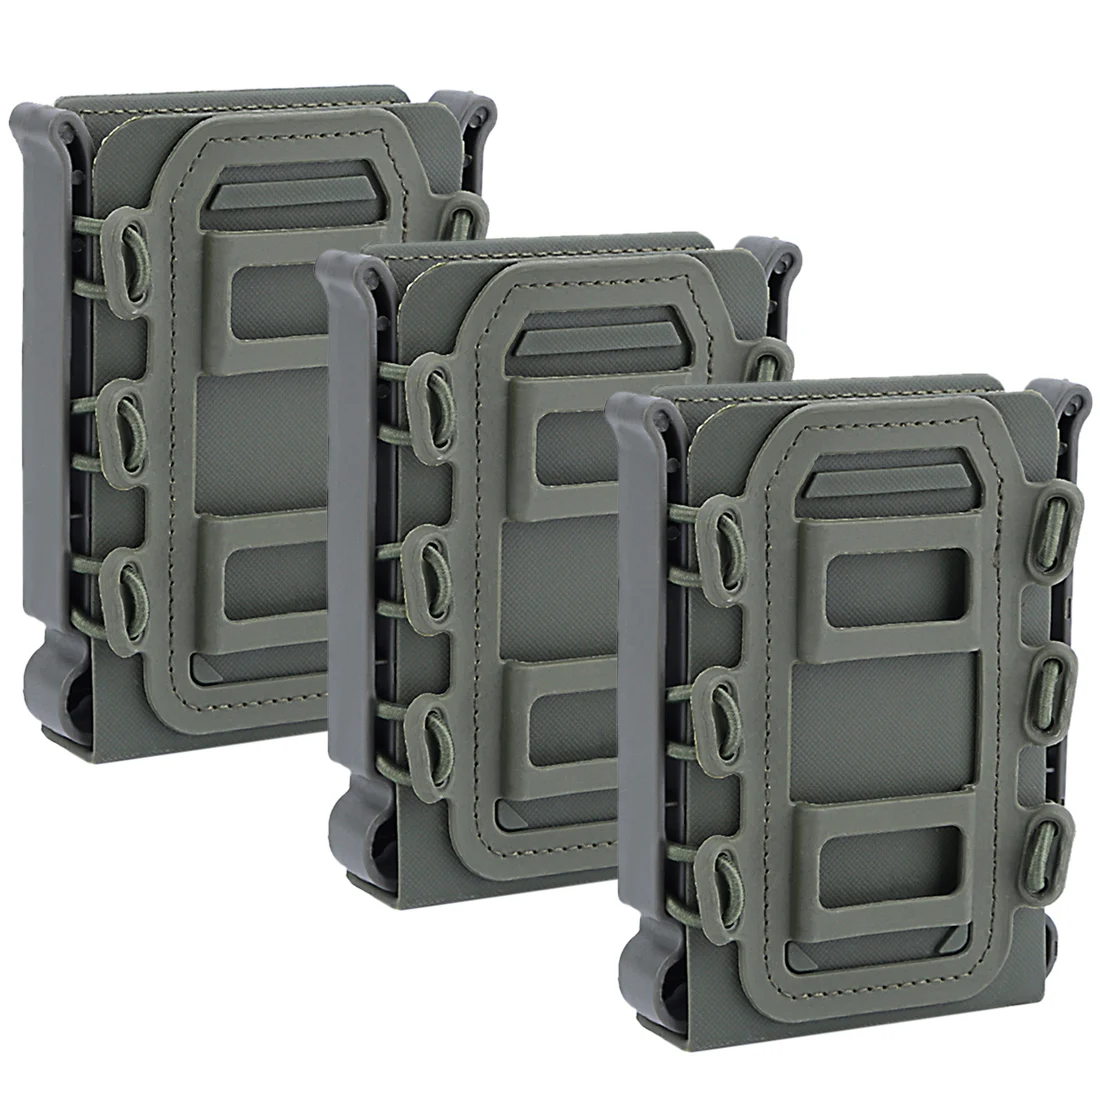 

3pcs/set WST TPR Flexible Ar15 M4 5.56 7.62 Mag Pouch Molle Fastmag Military Tactics Accessories - Olive Green / black /tan